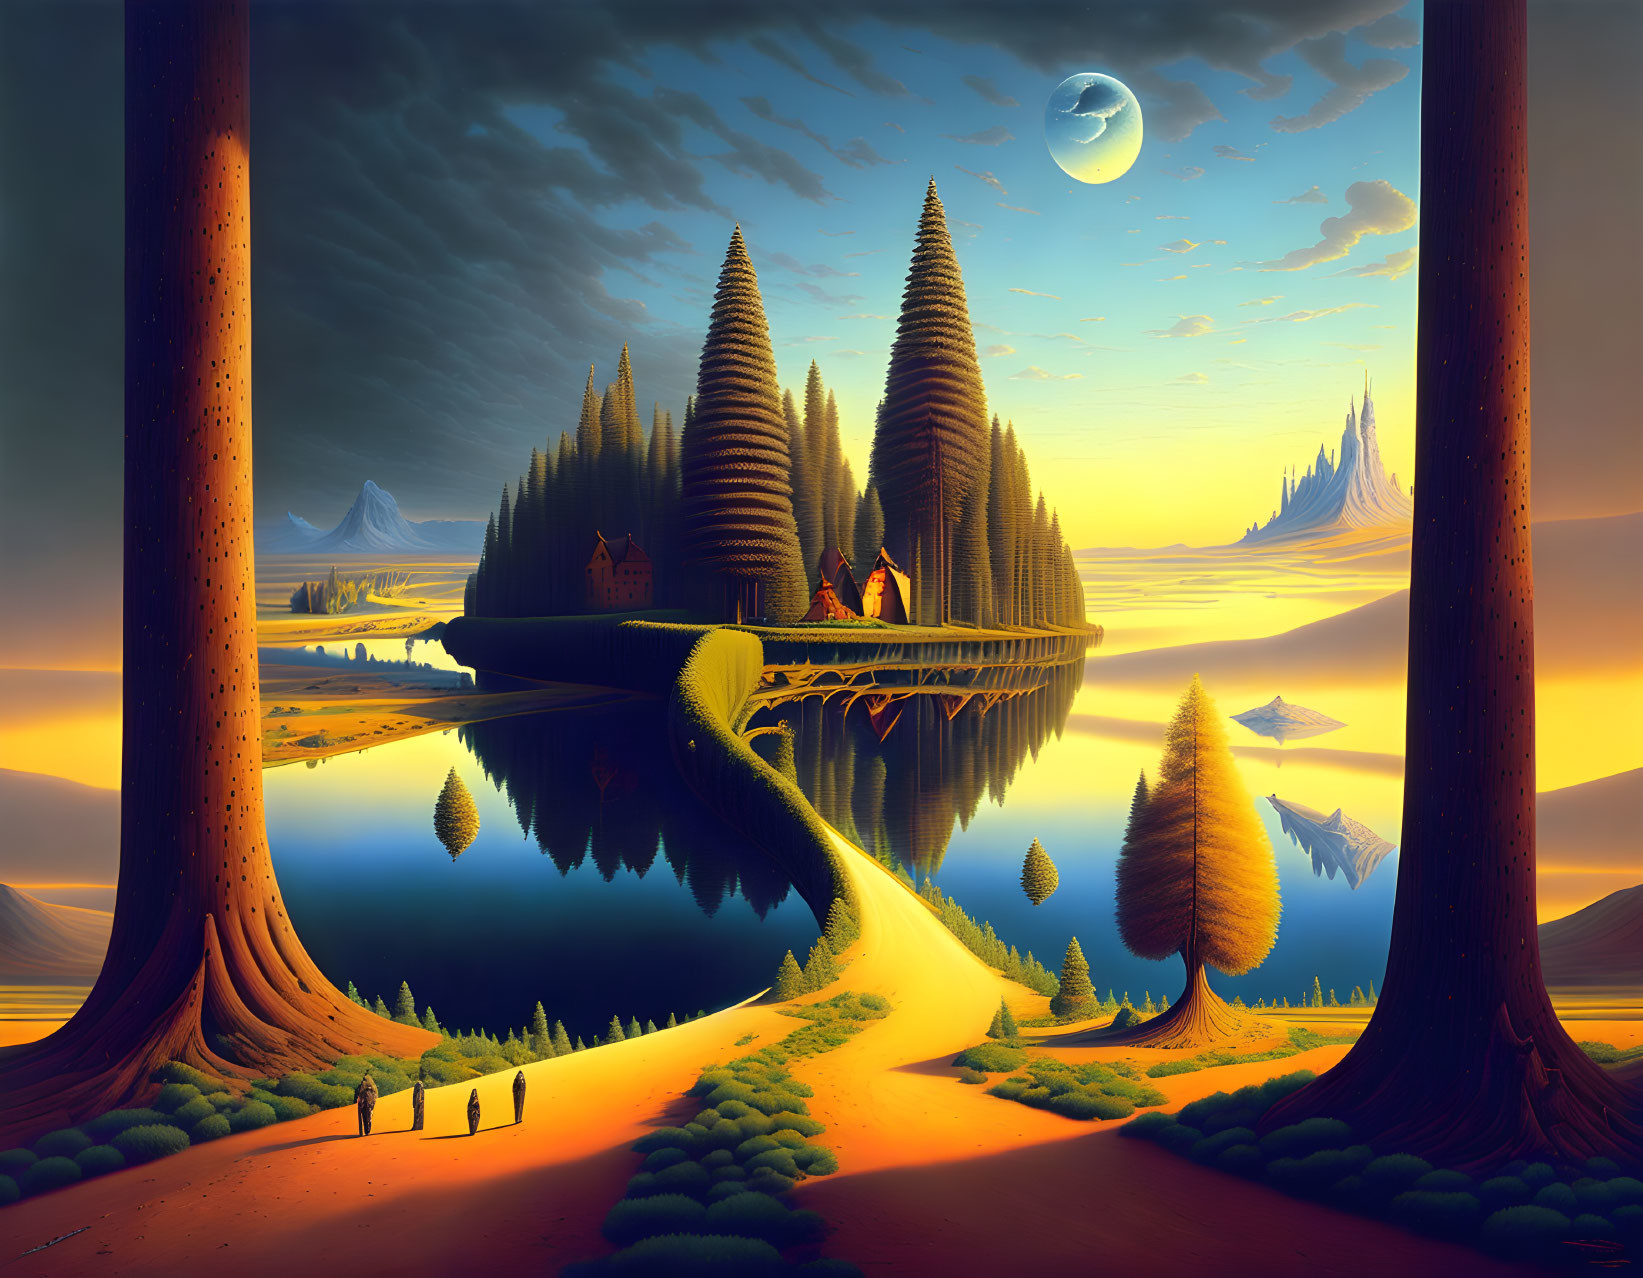 Surreal landscape with towering trees, winding path, conical hills, reflective lake, moonlit